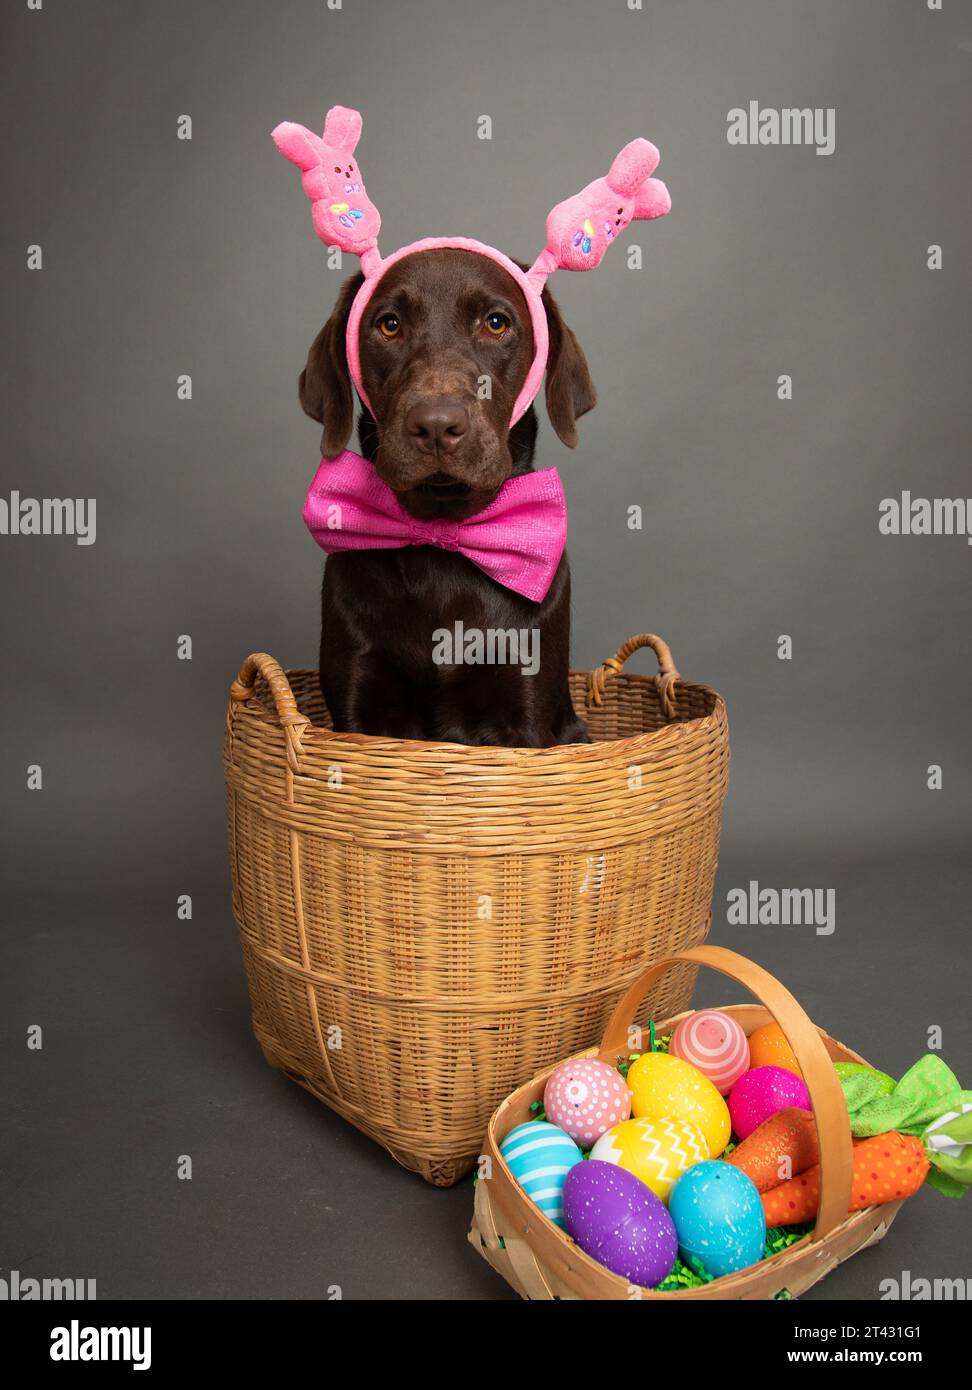 Chocolate labrador dog wearing a head band siting in a basket nest to painted Easter eggs Stock Photo